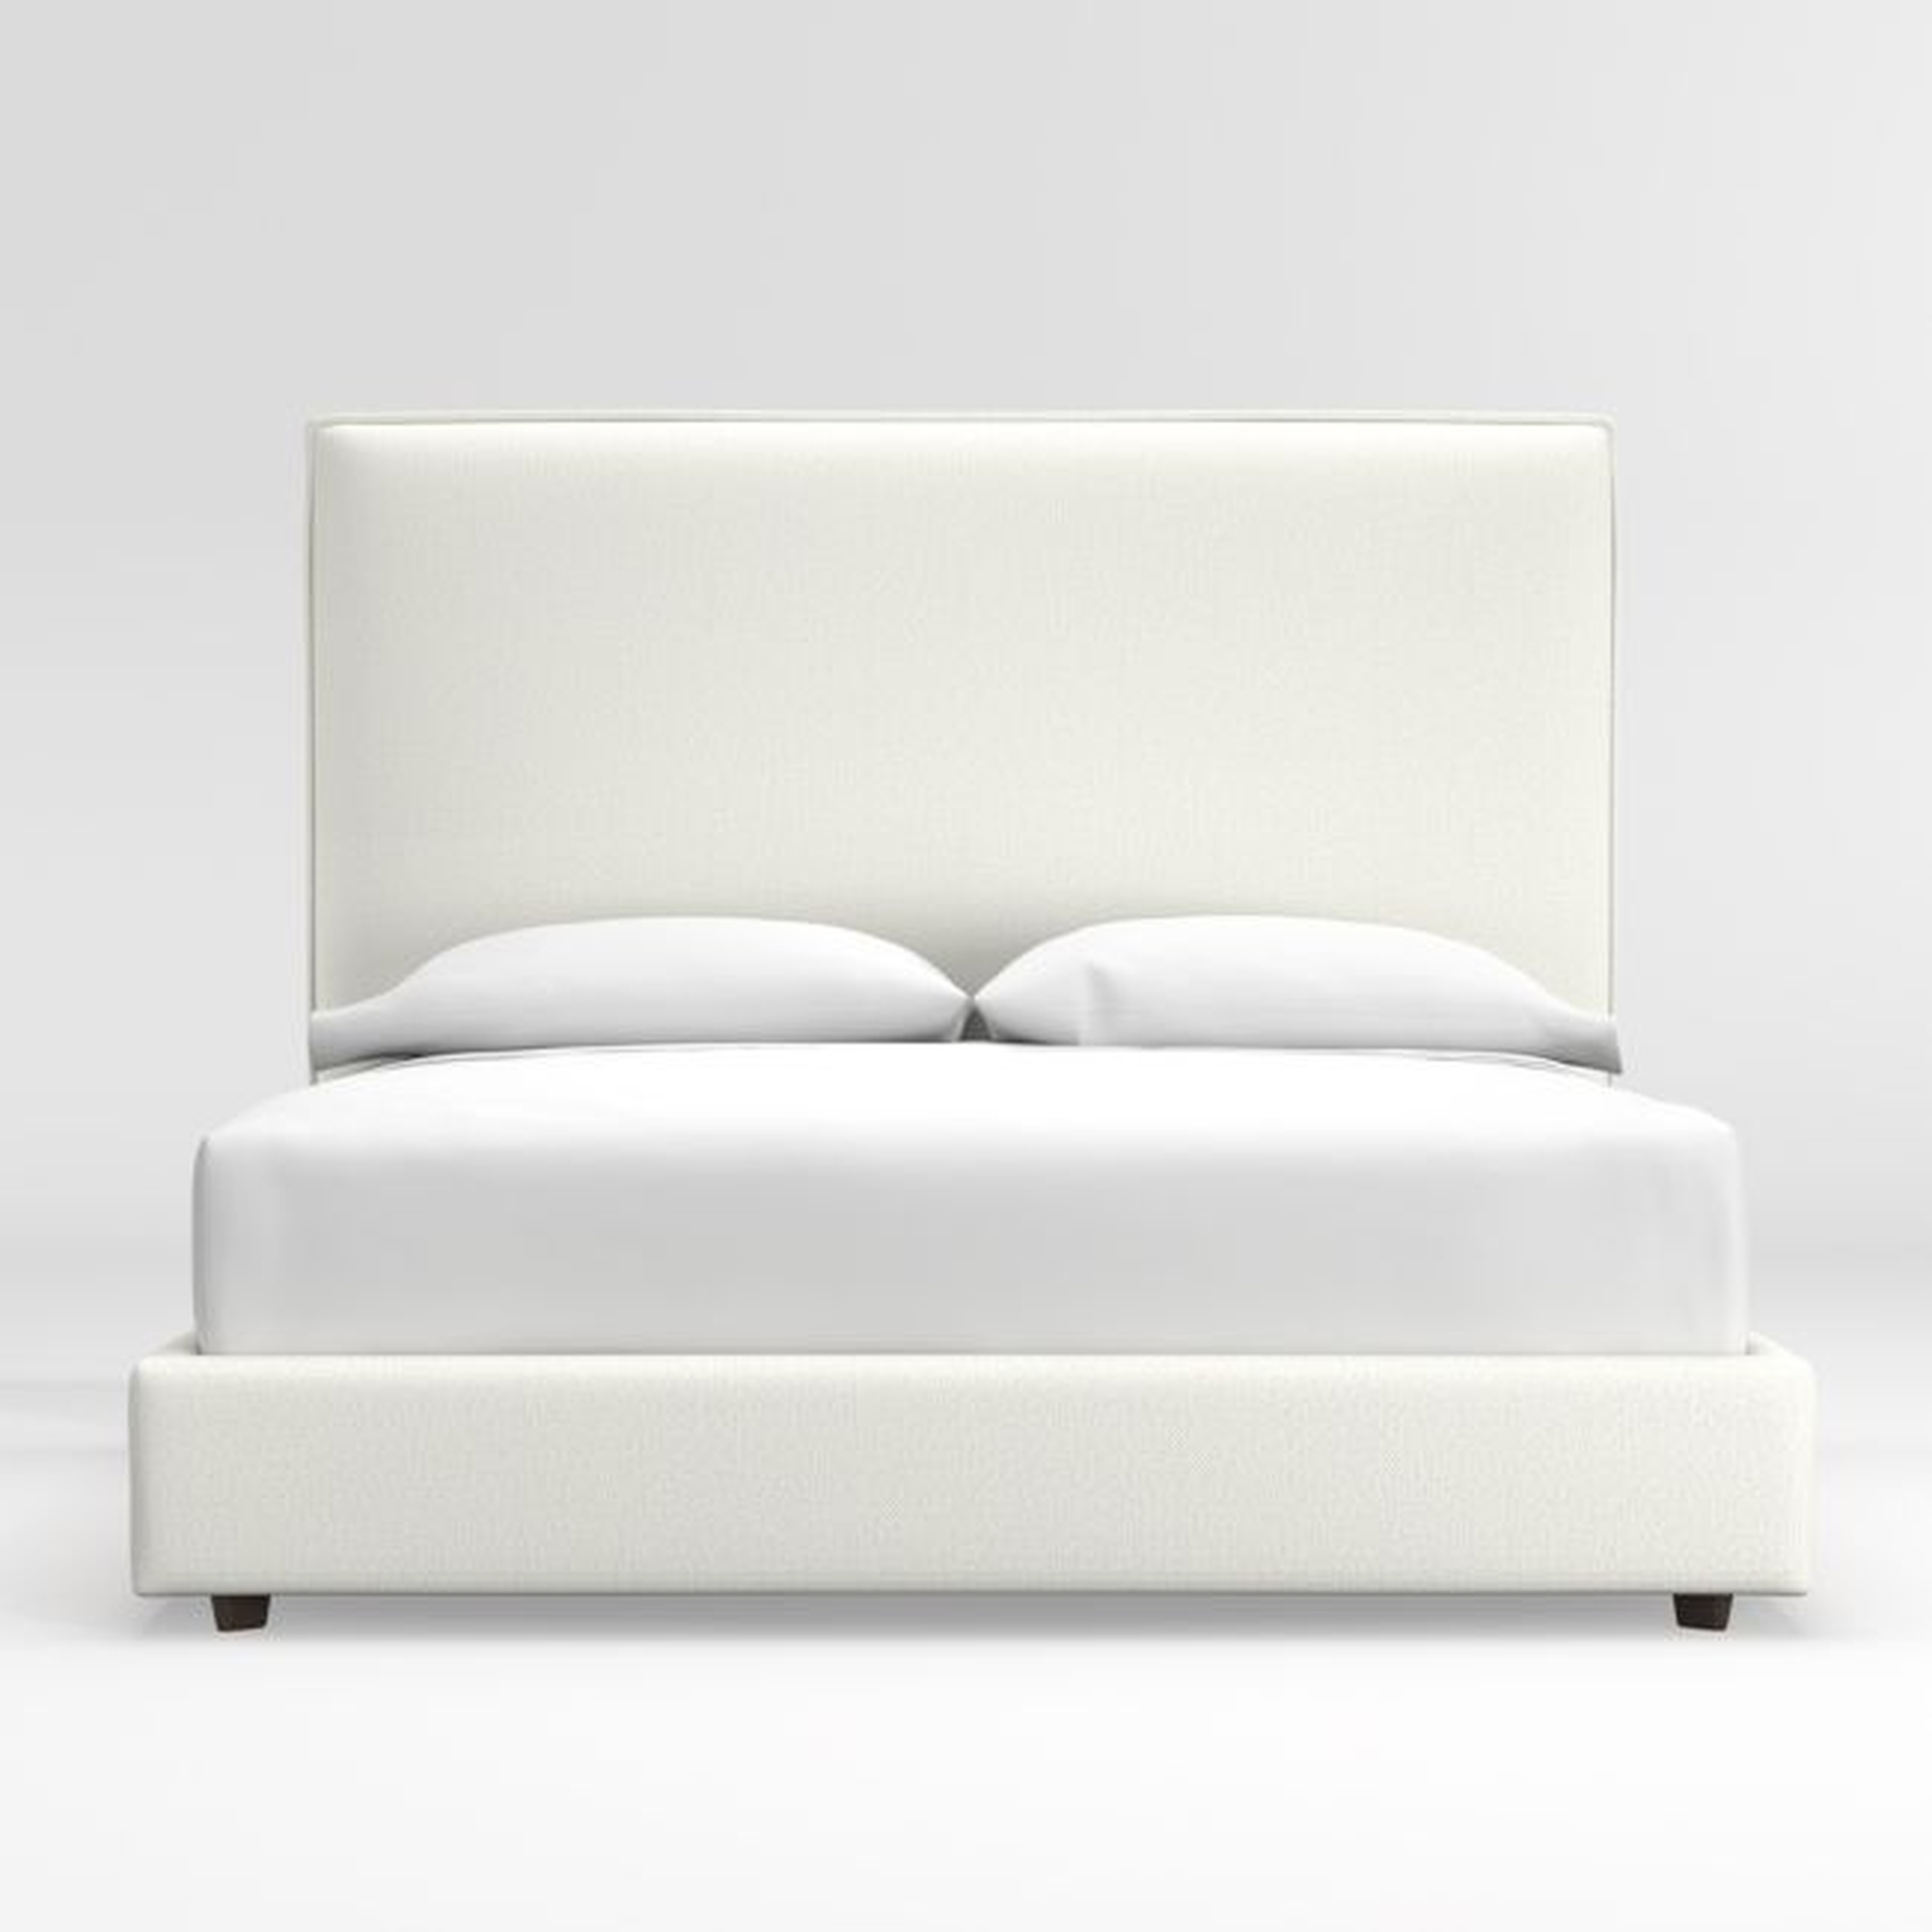 Lotus Upholstered Queen Bed with 53.5" Headboard - Crate and Barrel